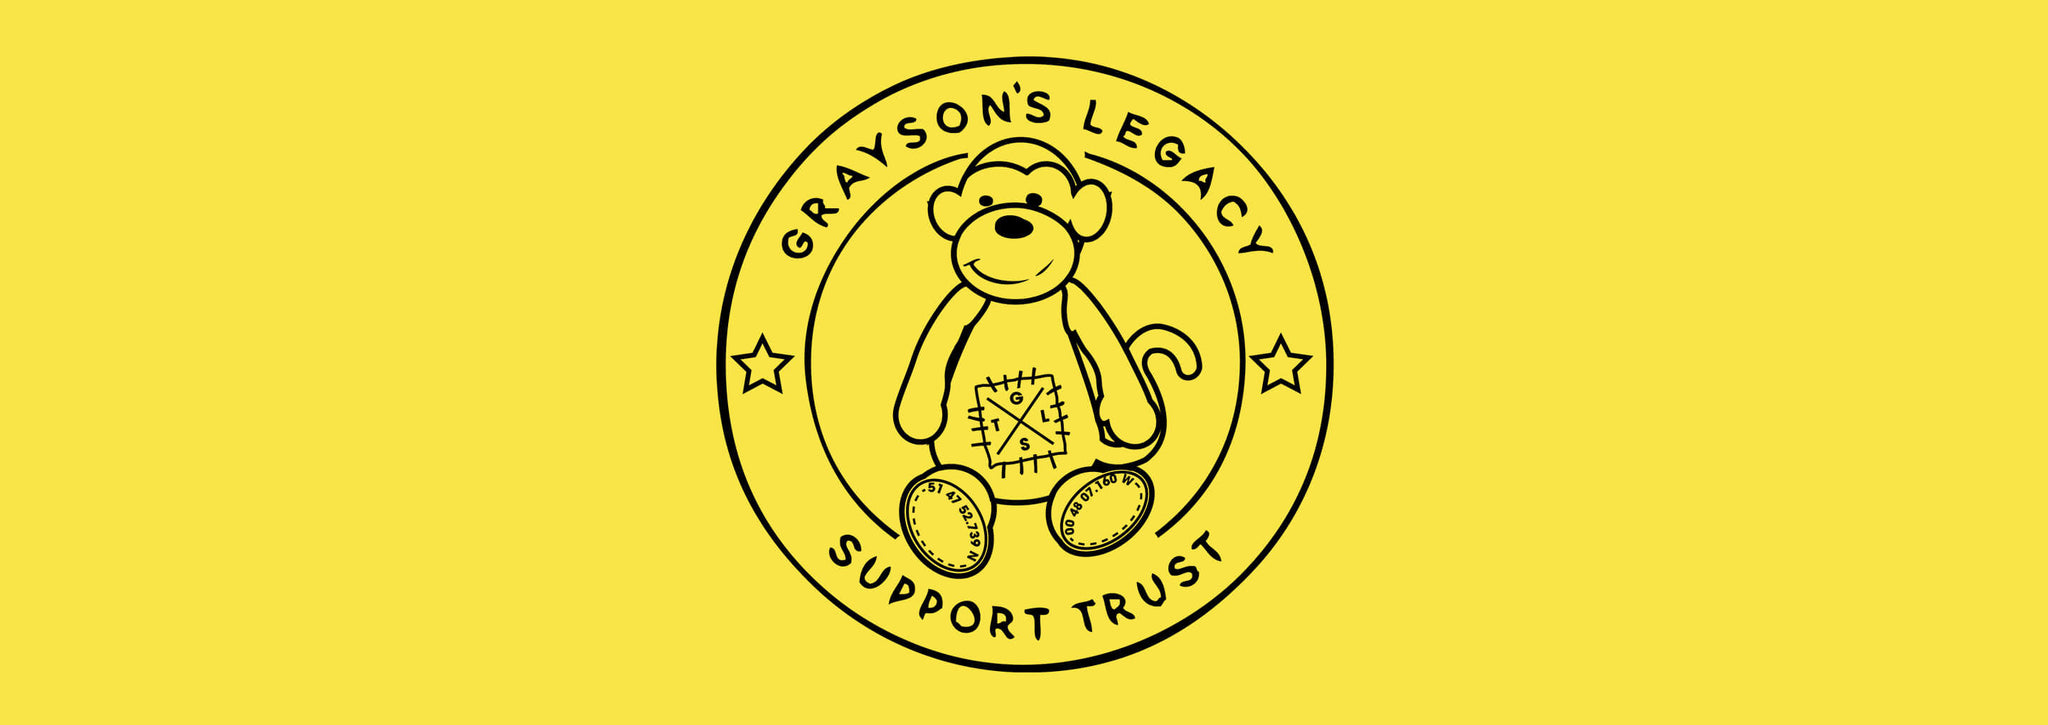 Saying Ohelo to Grayson's Legacy Support Trust